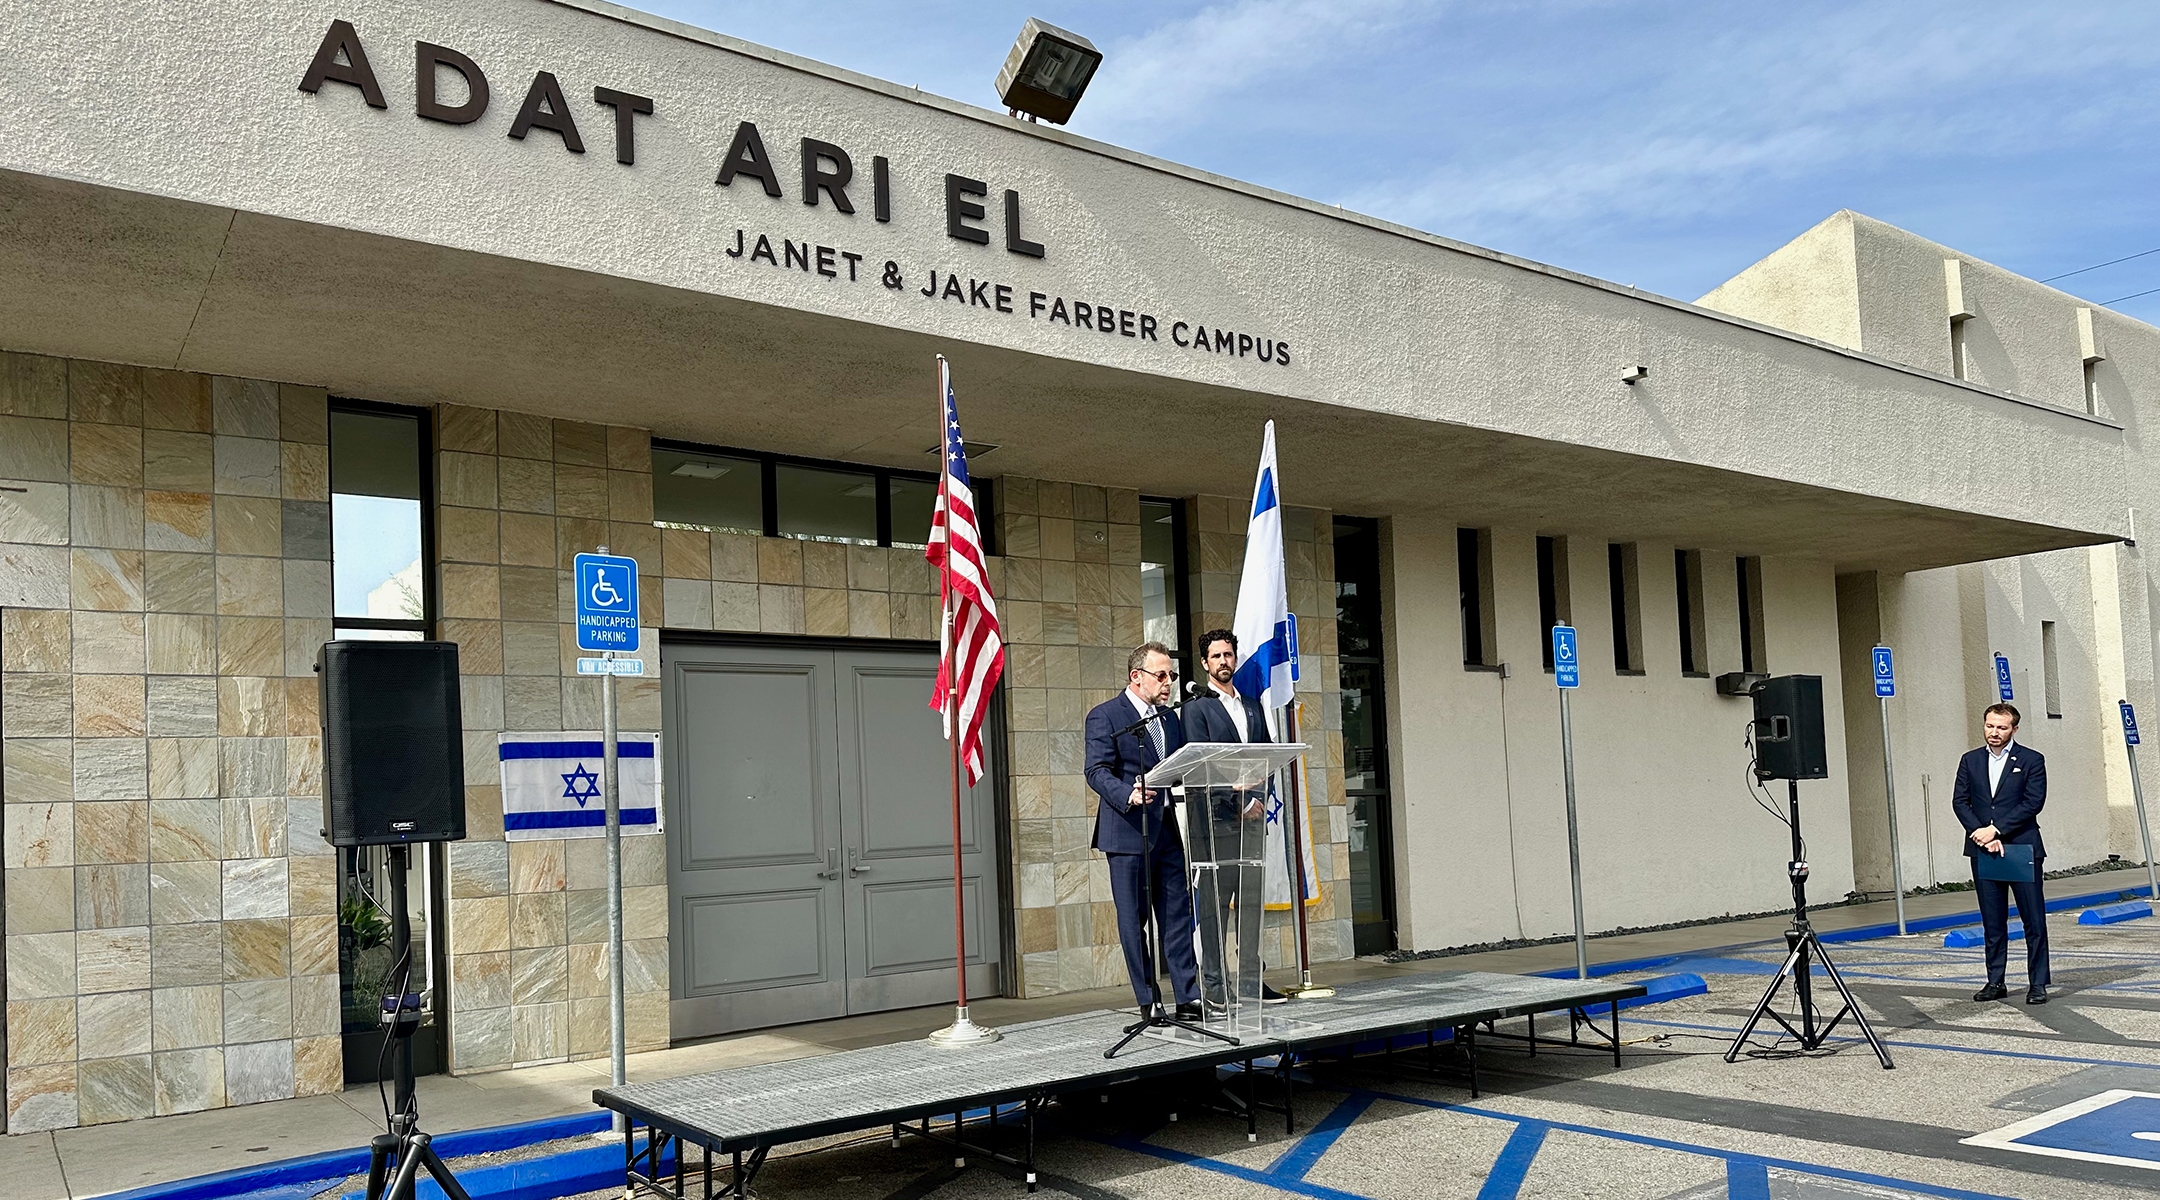 Adat Ari El Rabbi Brian Schuldenfrei, left, and Executive Director Eric Nicastro, at a press conference outside the synagogue, Nov. 10, 2023 in Los Angeles. (Jacob Gurvis)